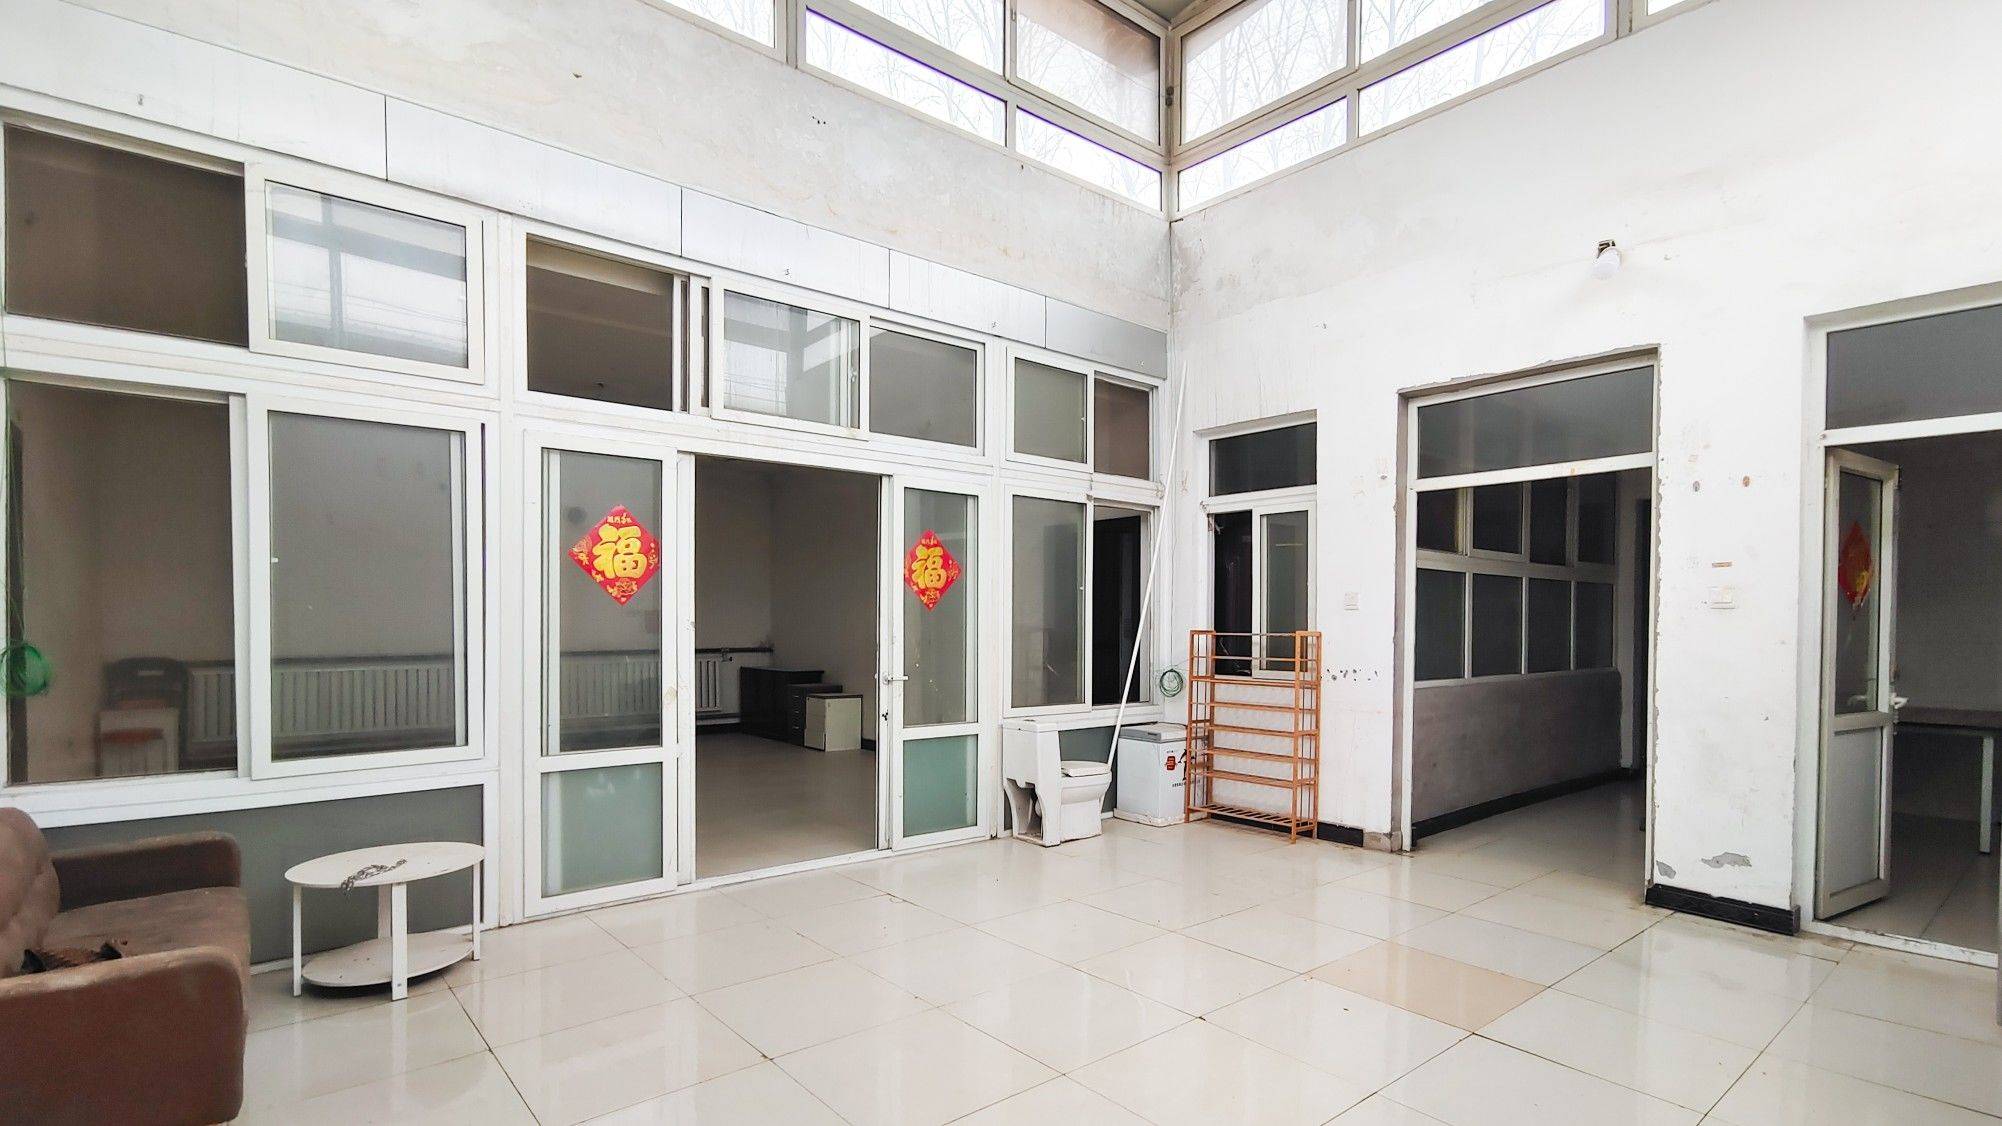 Beijing-Tongzhou-Cozy Home,Clean&Comfy,No Gender Limit,Chilled